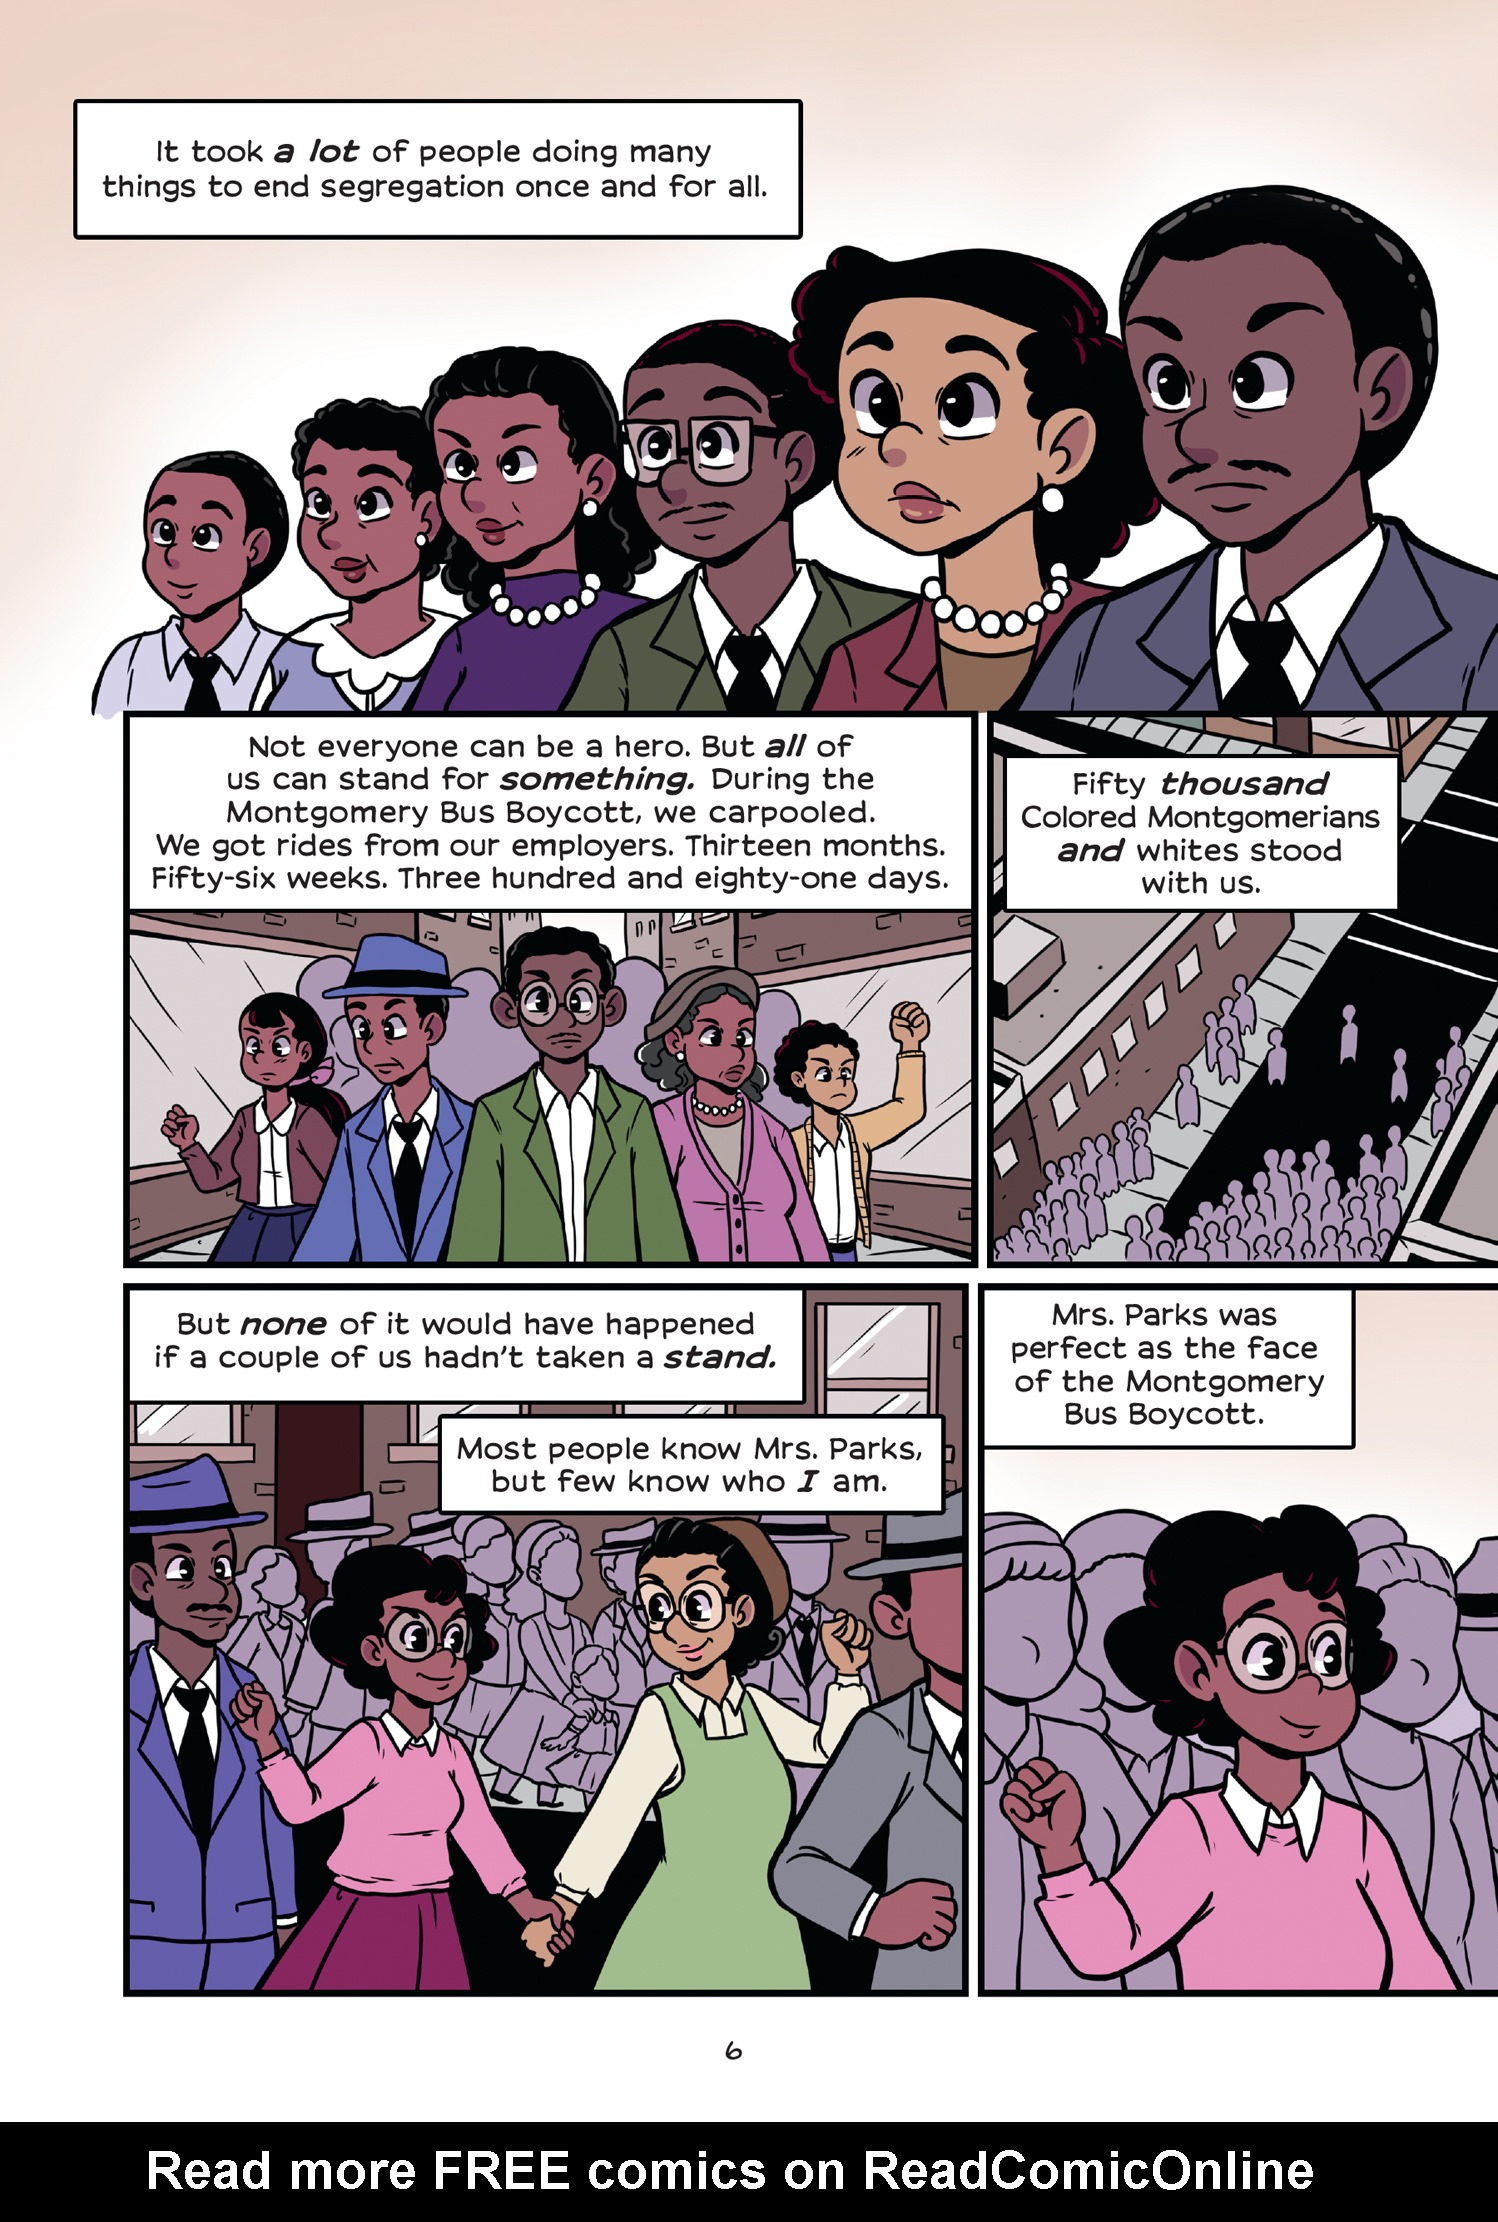 Read online History Comics comic -  Issue # Rosa Parks & Claudette Colvin - Civil Rights Heroes - 12